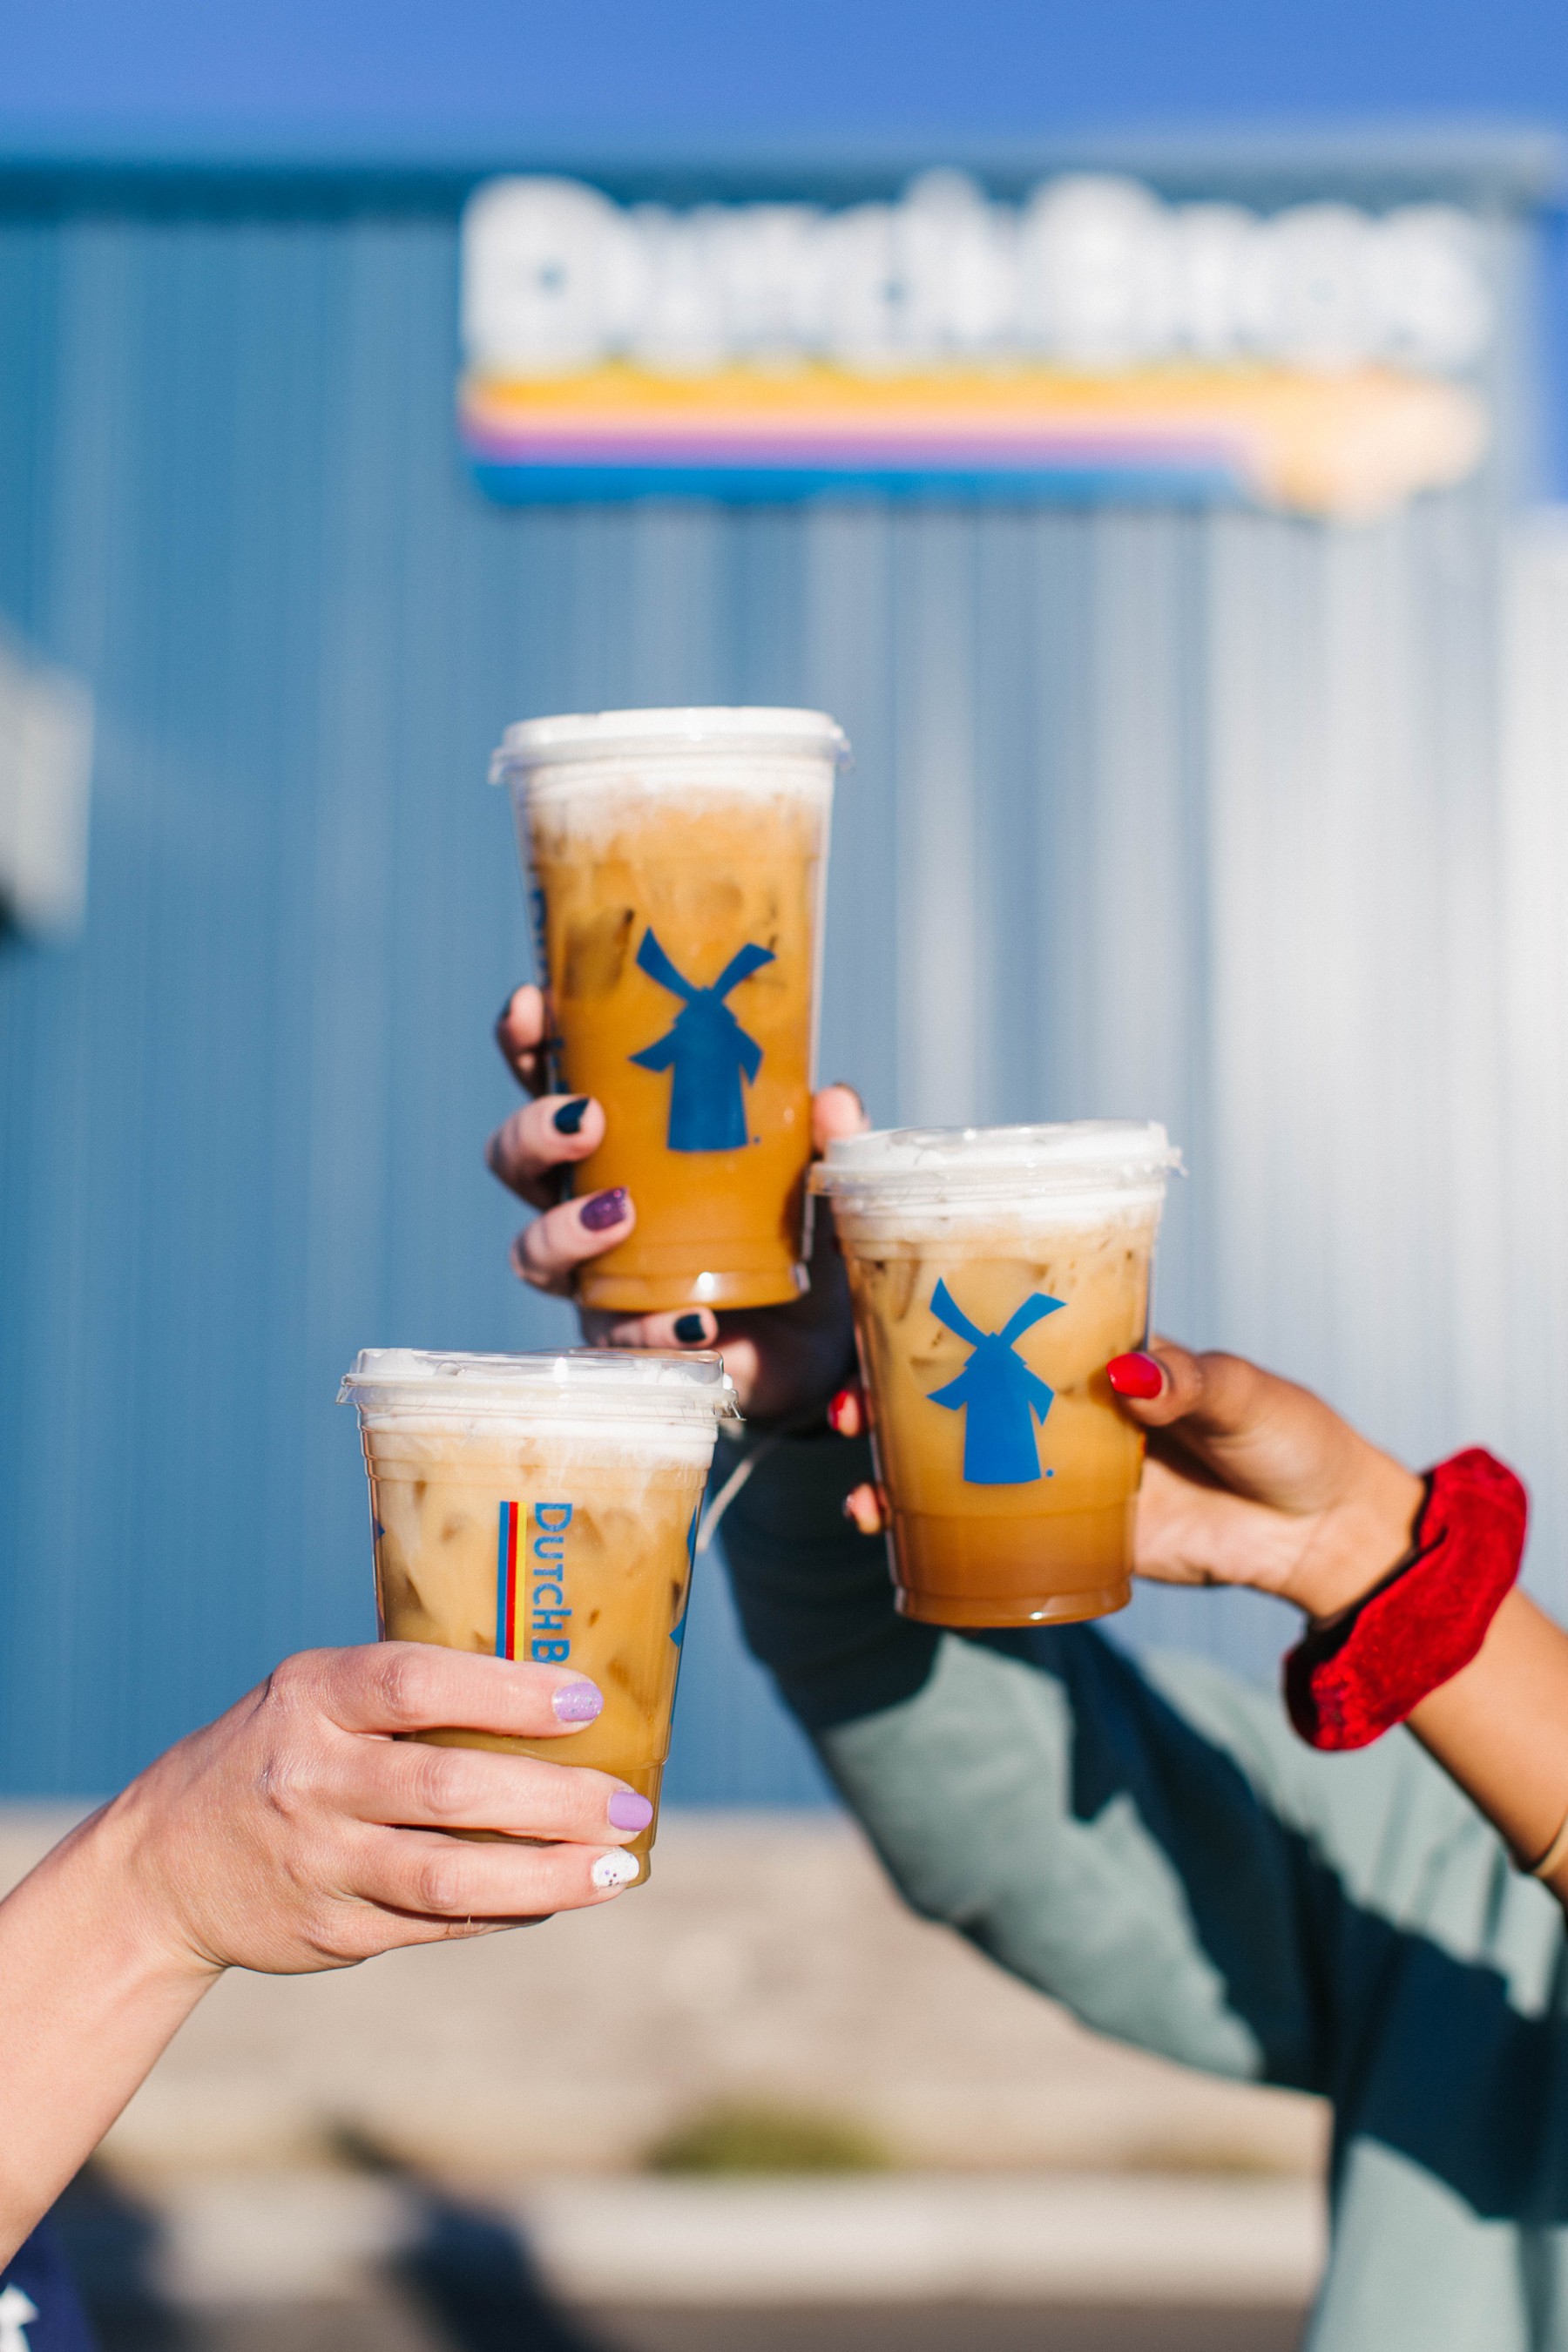 Starting today through National Cold Brew Day, customers can score big with Cold Brew purchases on the Dutch Bros app!